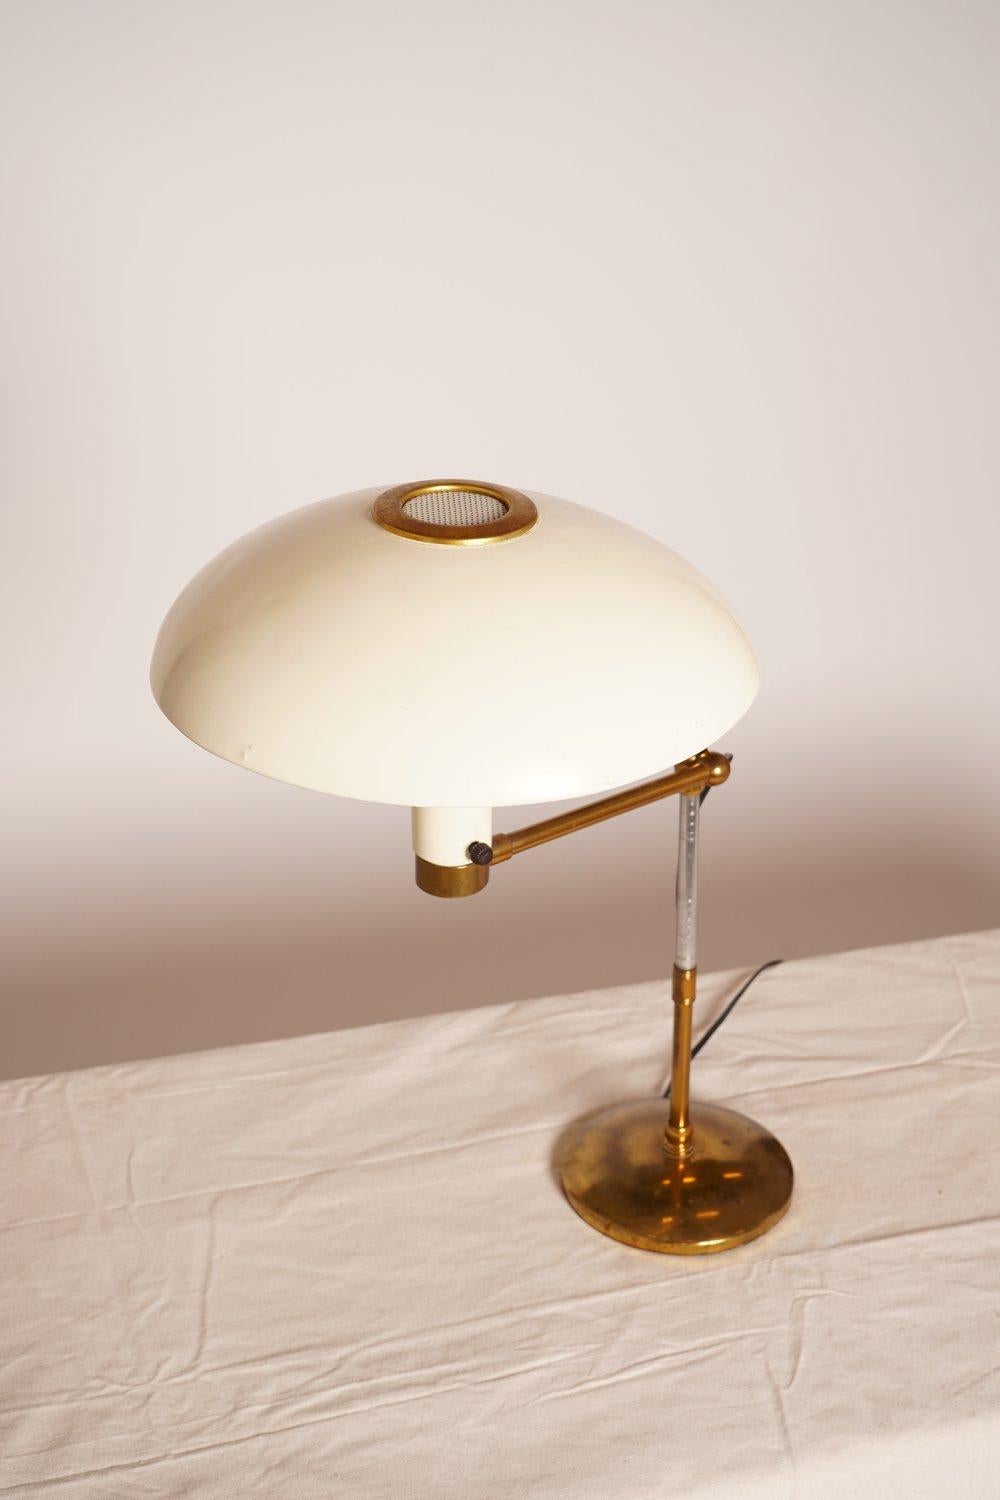 This Art Deco Dazor swing arm brass desk lamp features a metal reflector saucer shade with perforation, adjustable stem, swing arm, brass details and bright brass 6.5D base.